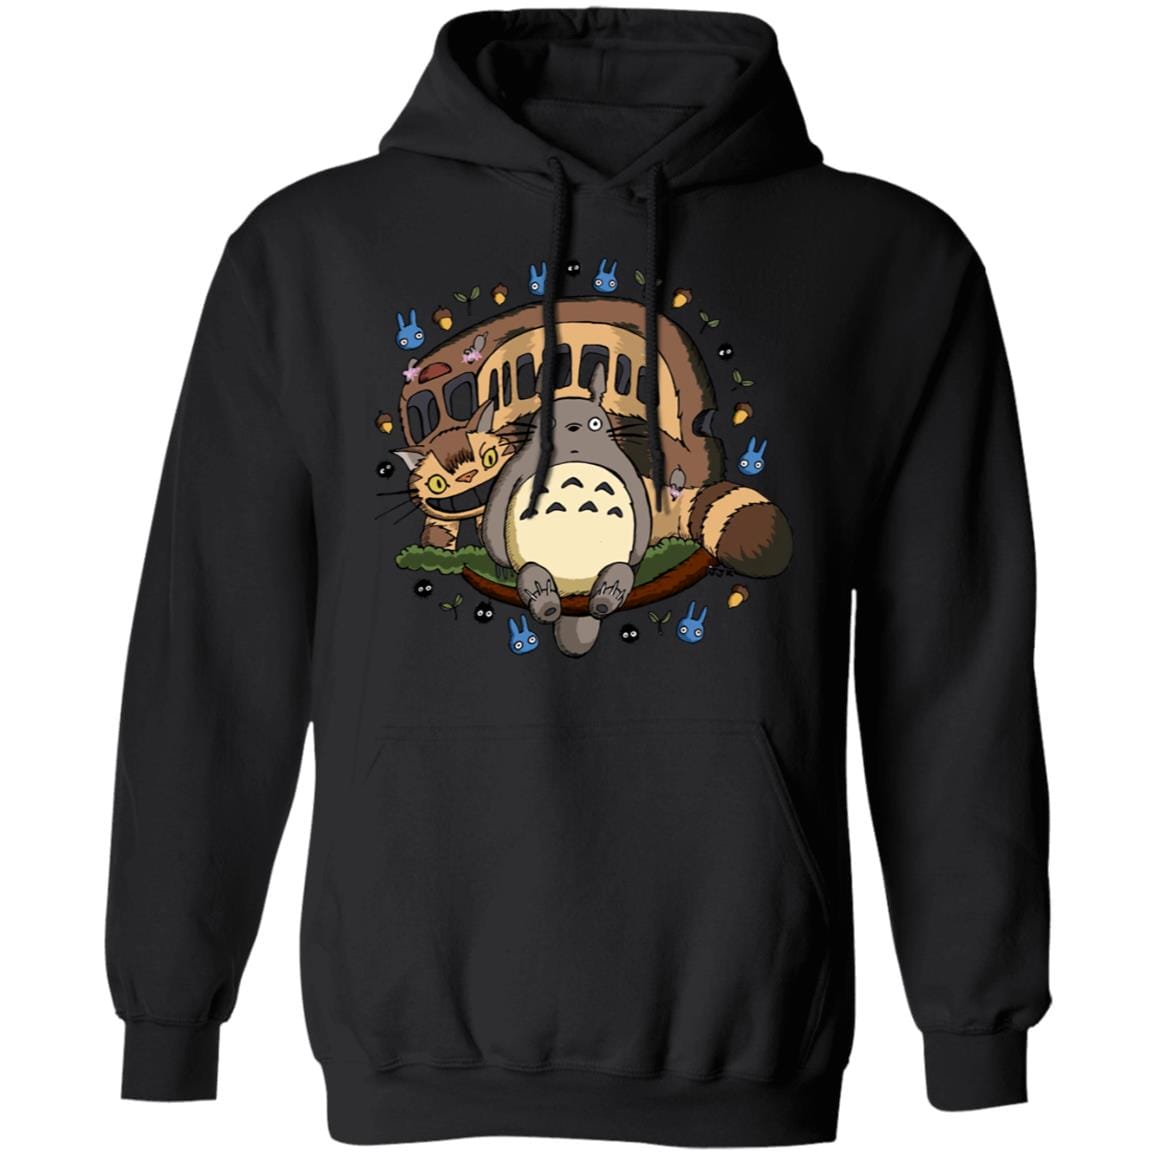 Totoro and the Catbus Hoodie